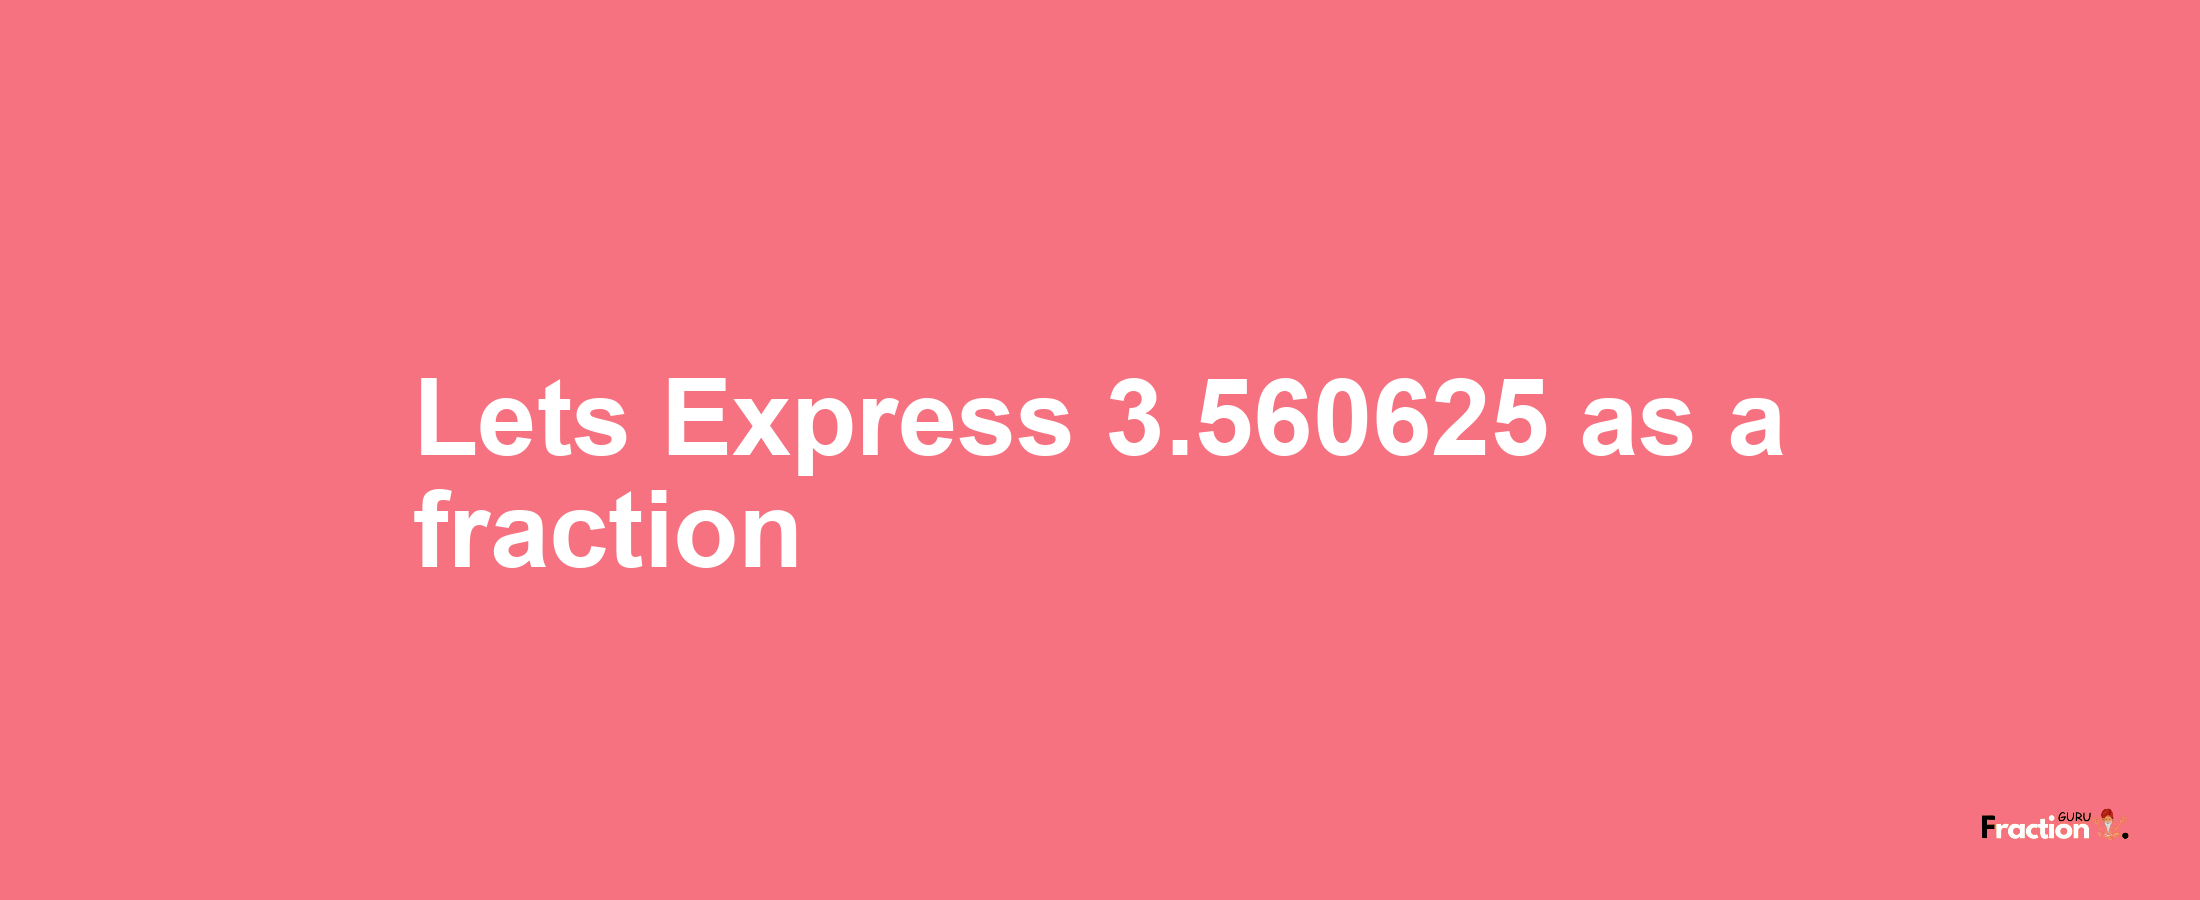 Lets Express 3.560625 as afraction